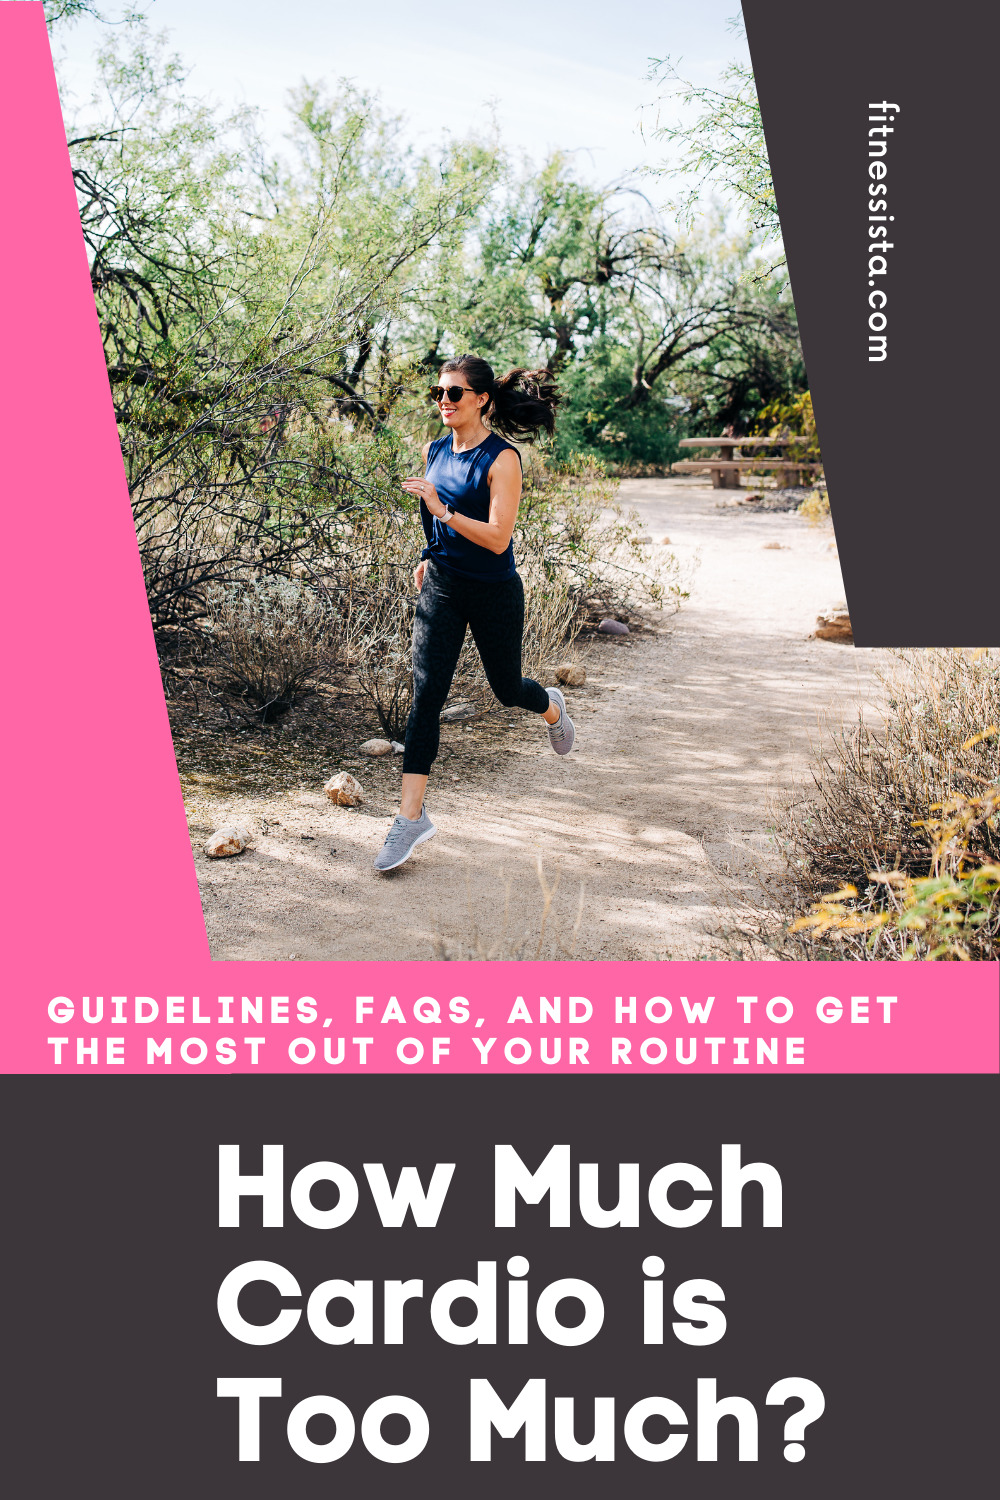 How Much Cardio Is Too Much? - The Fitnessista